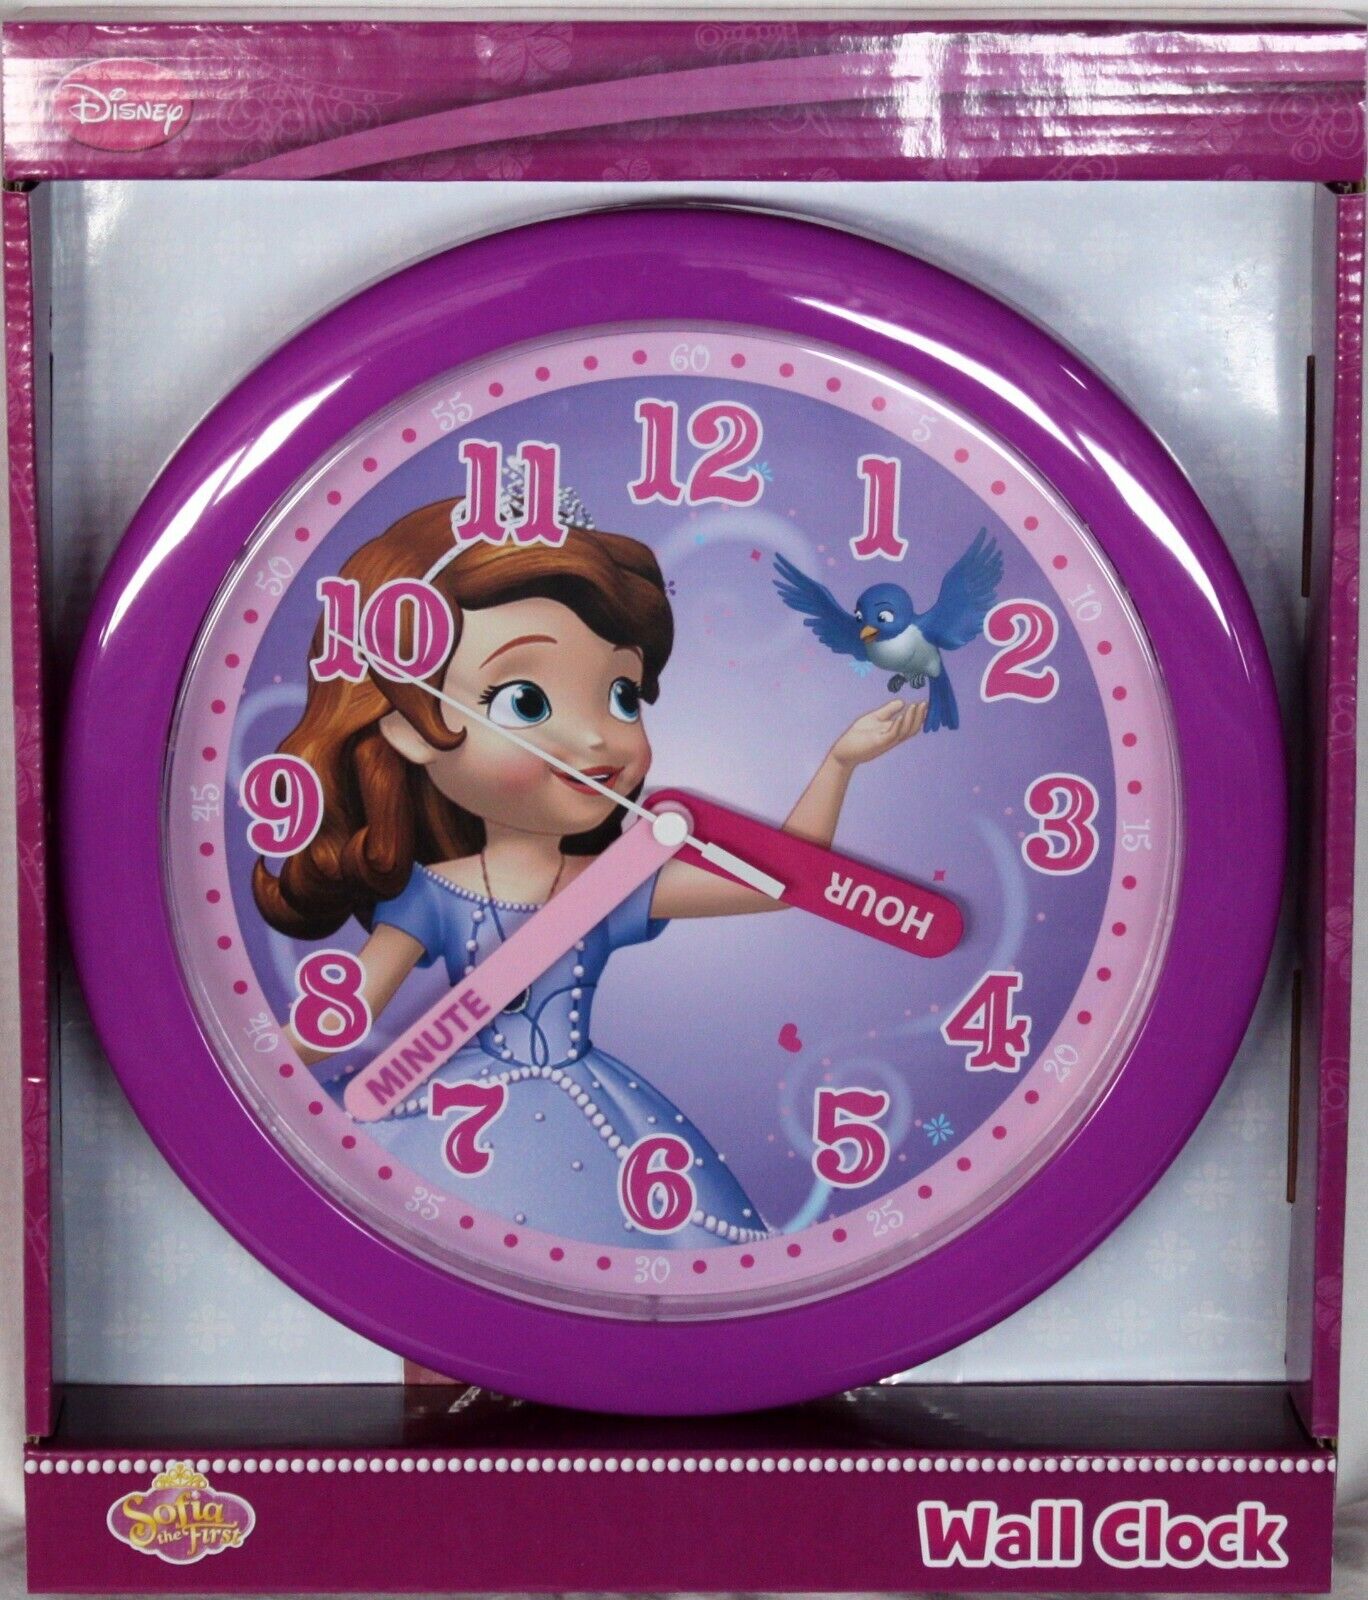 New in pack, Disney Sofia the First, 9 inches round Wall Clock...